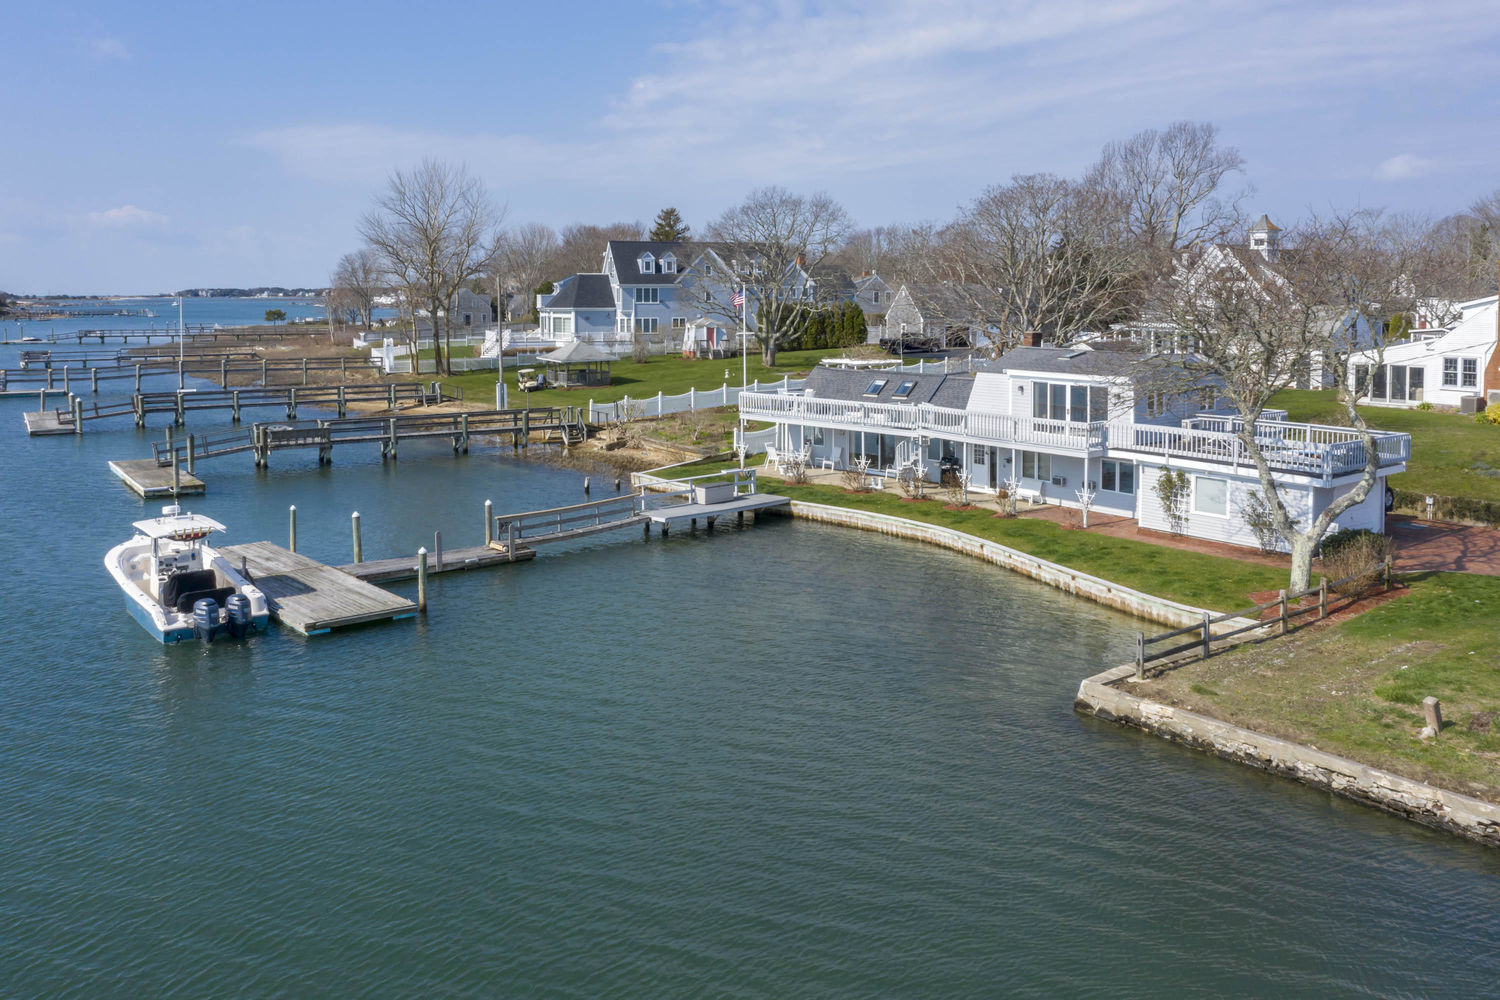 Photograph of homes on the water with docks in South Yarmouth